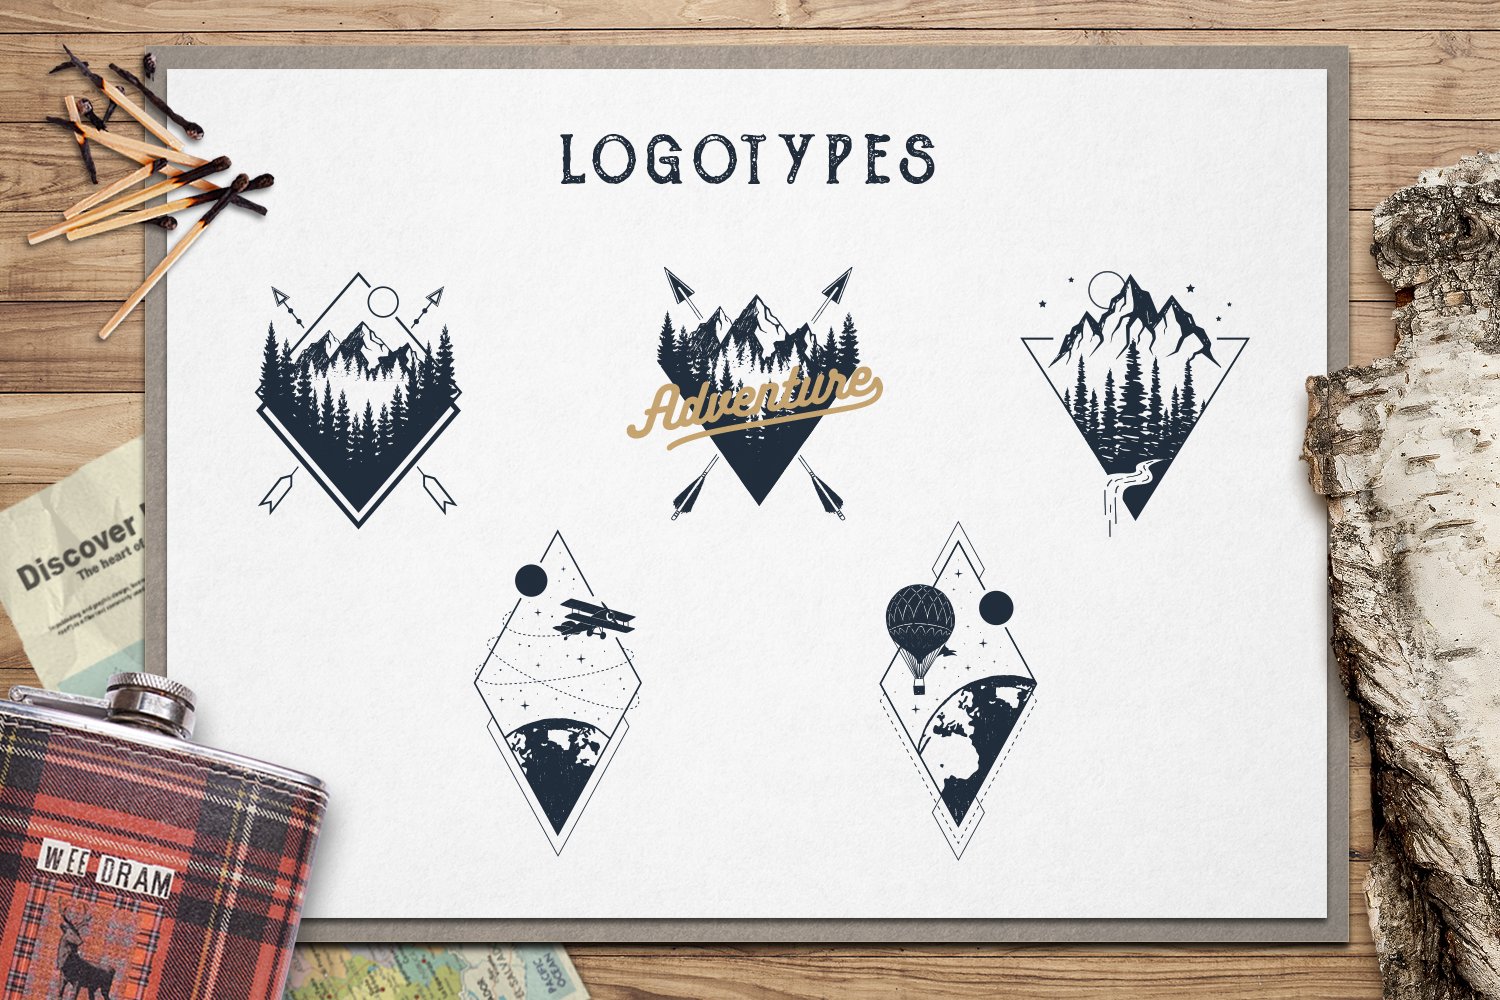 Interesting geometric shapes for your adventure logos.